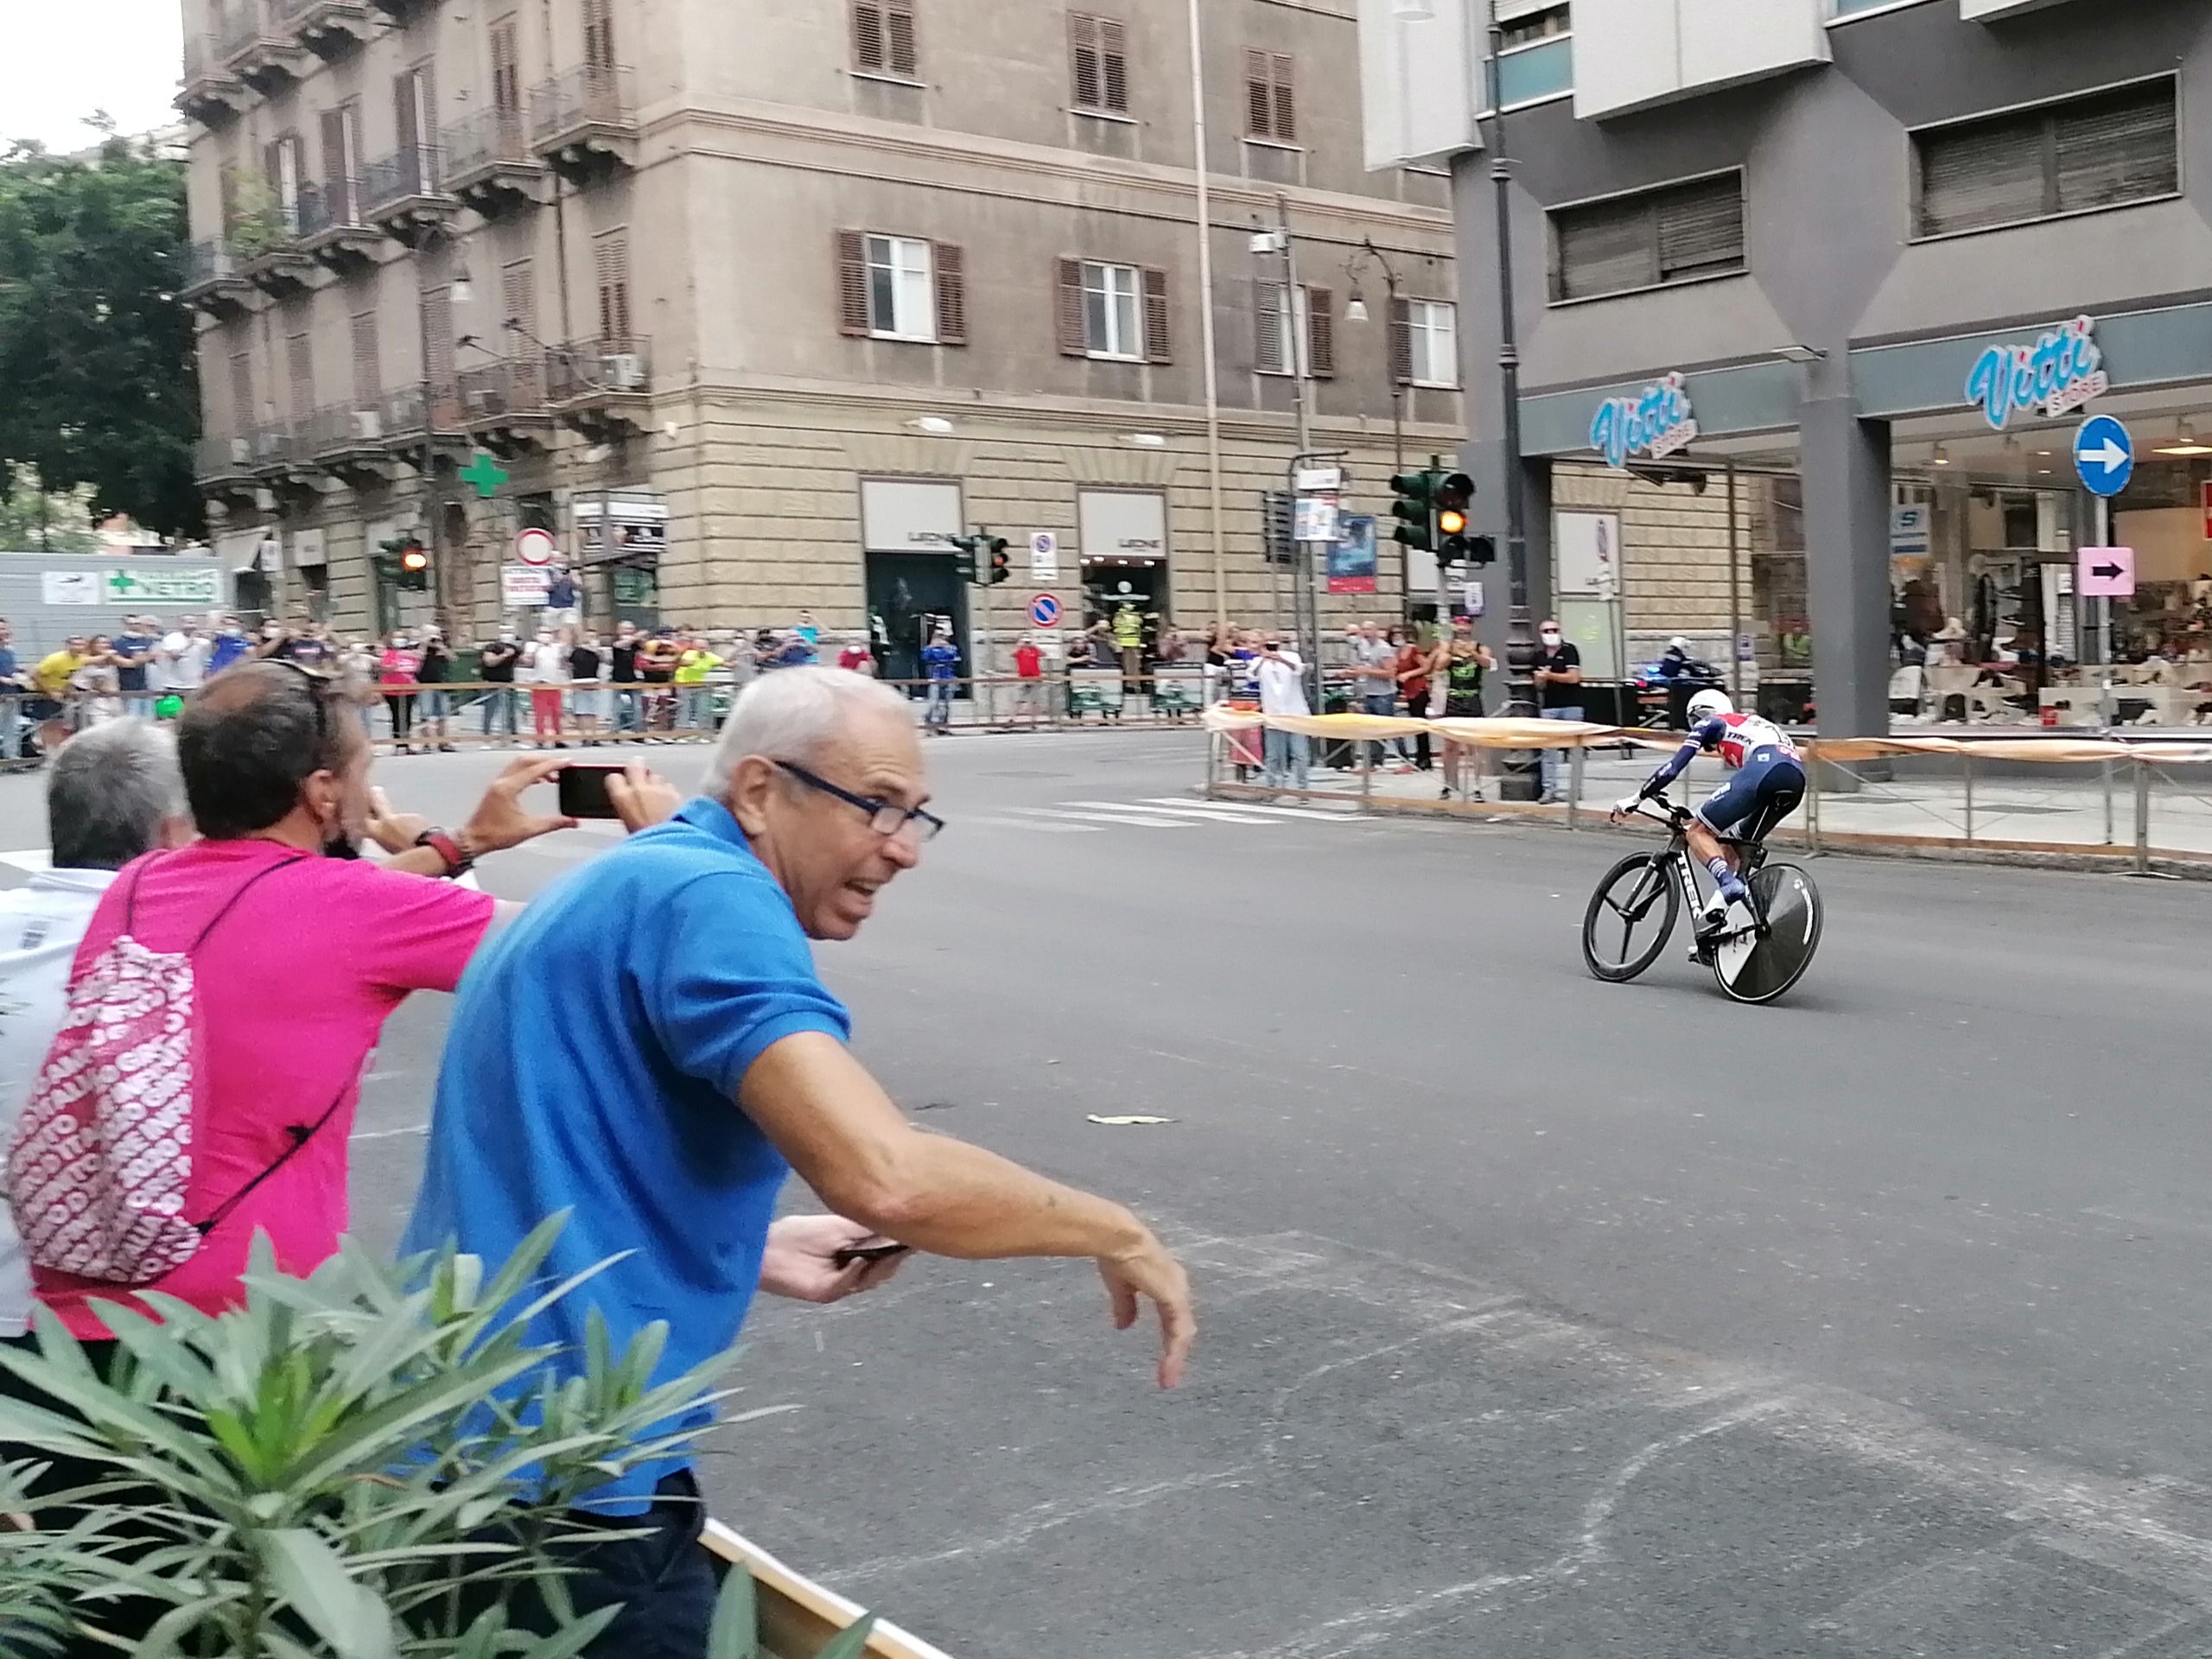 Vincenzo Nibali passes the emotional crowd in Palermo on Saturday